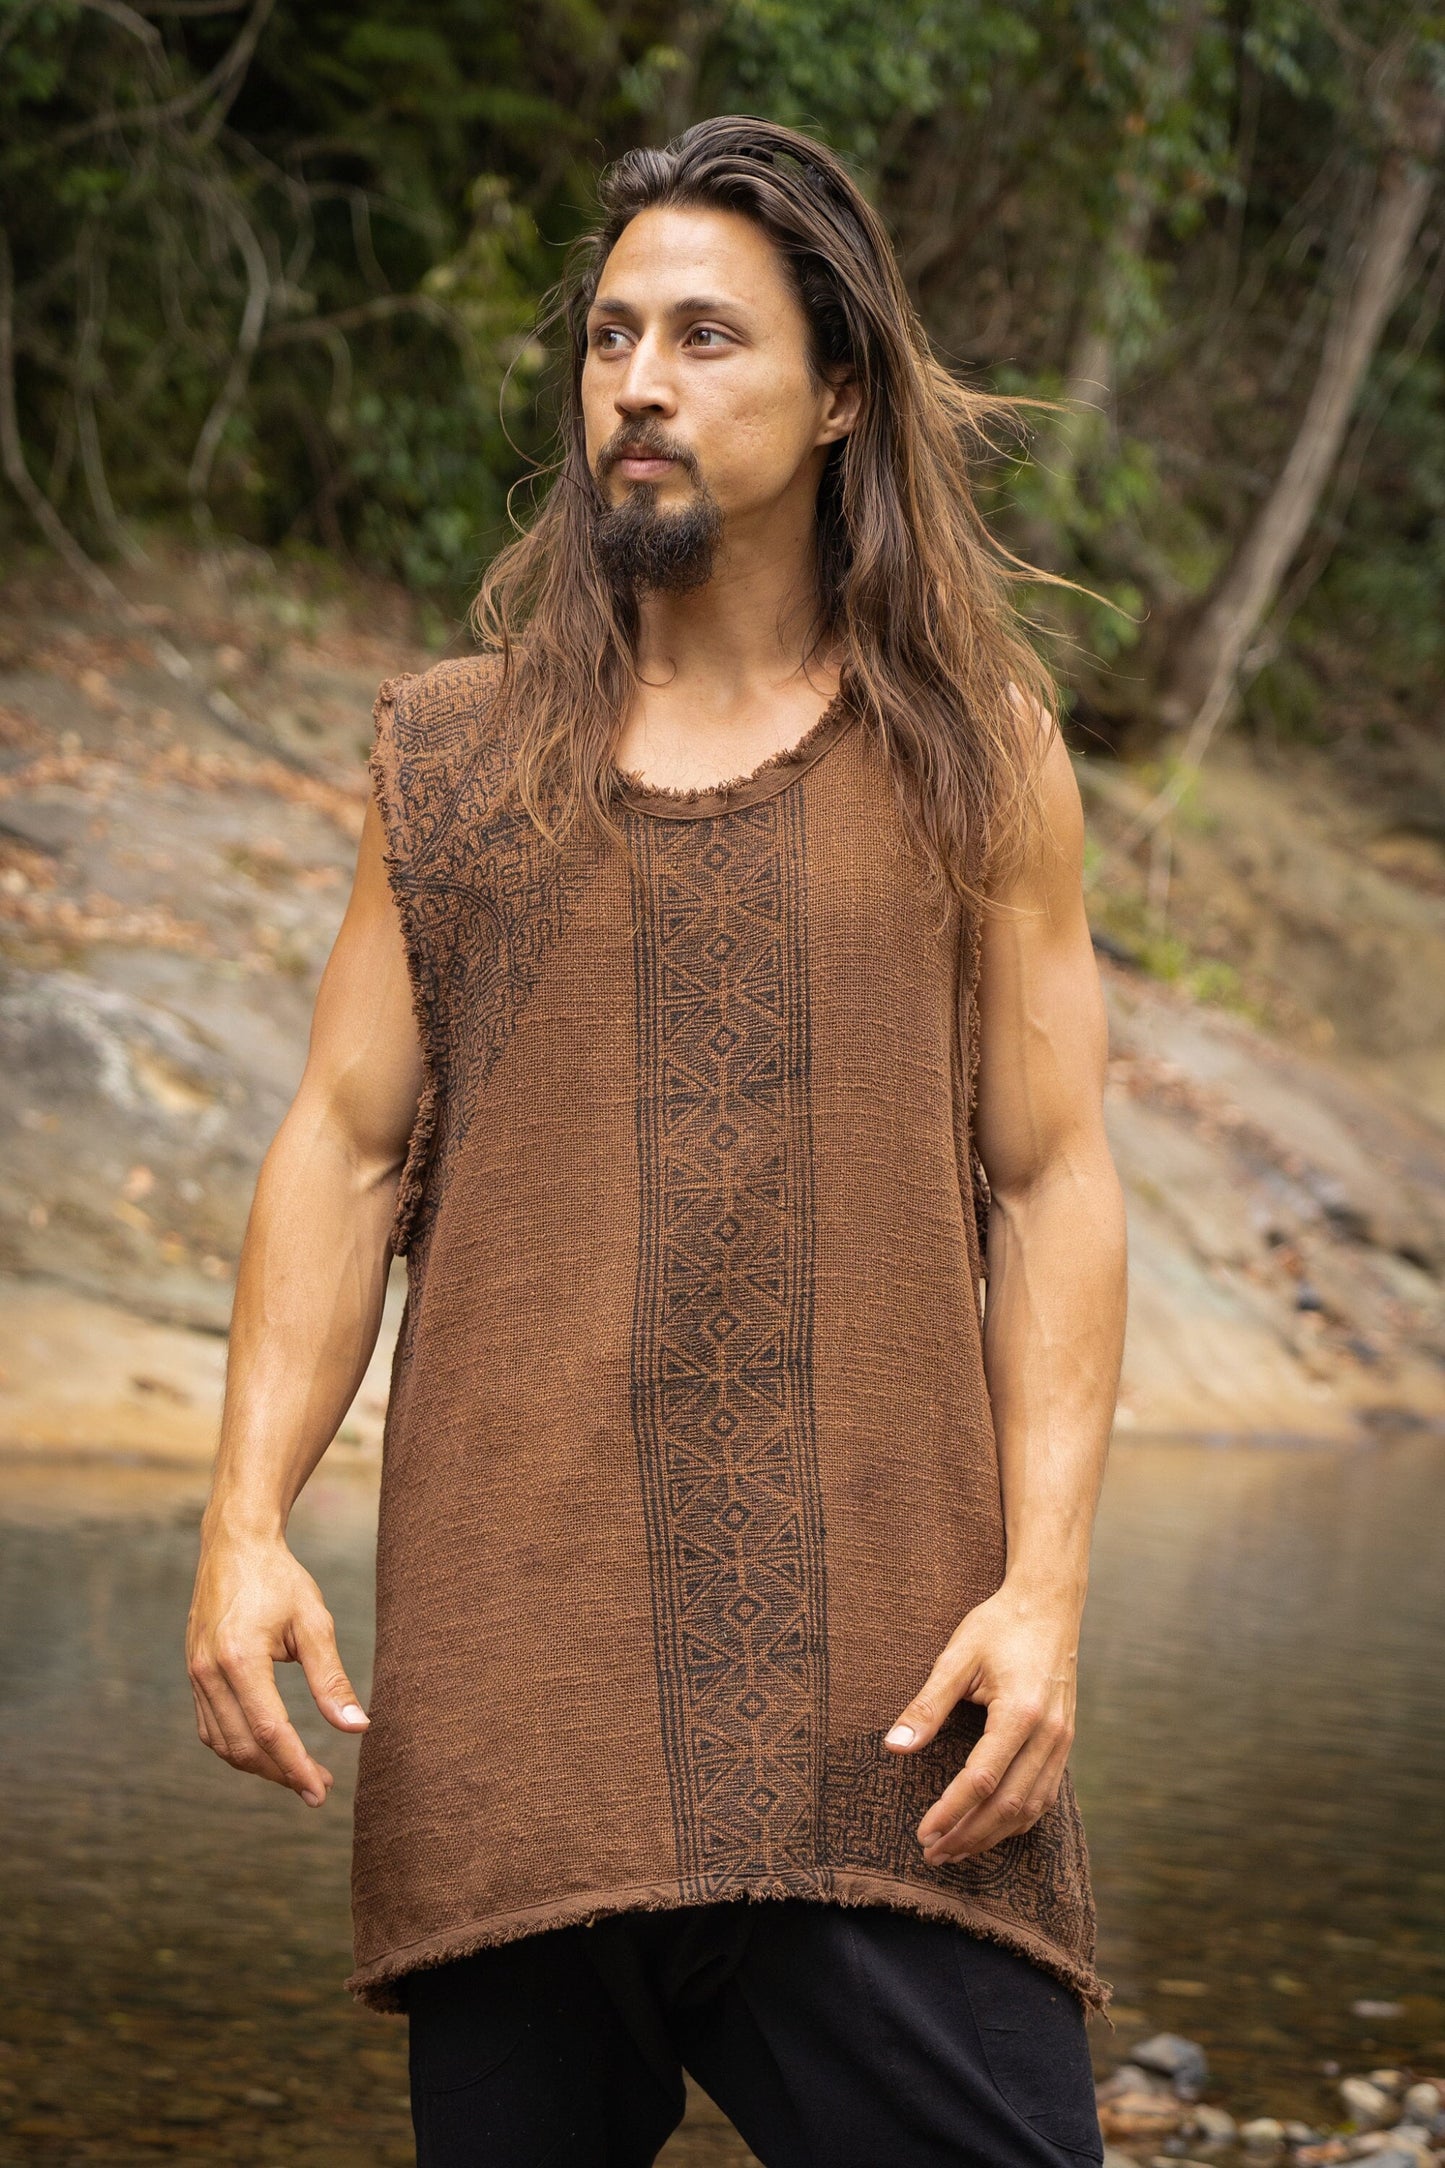 Our AKAU shamanic tank top features intricate block-printed shipibo tribal patterns that are hand-applied, giving each shirt a unique and authentic touch.